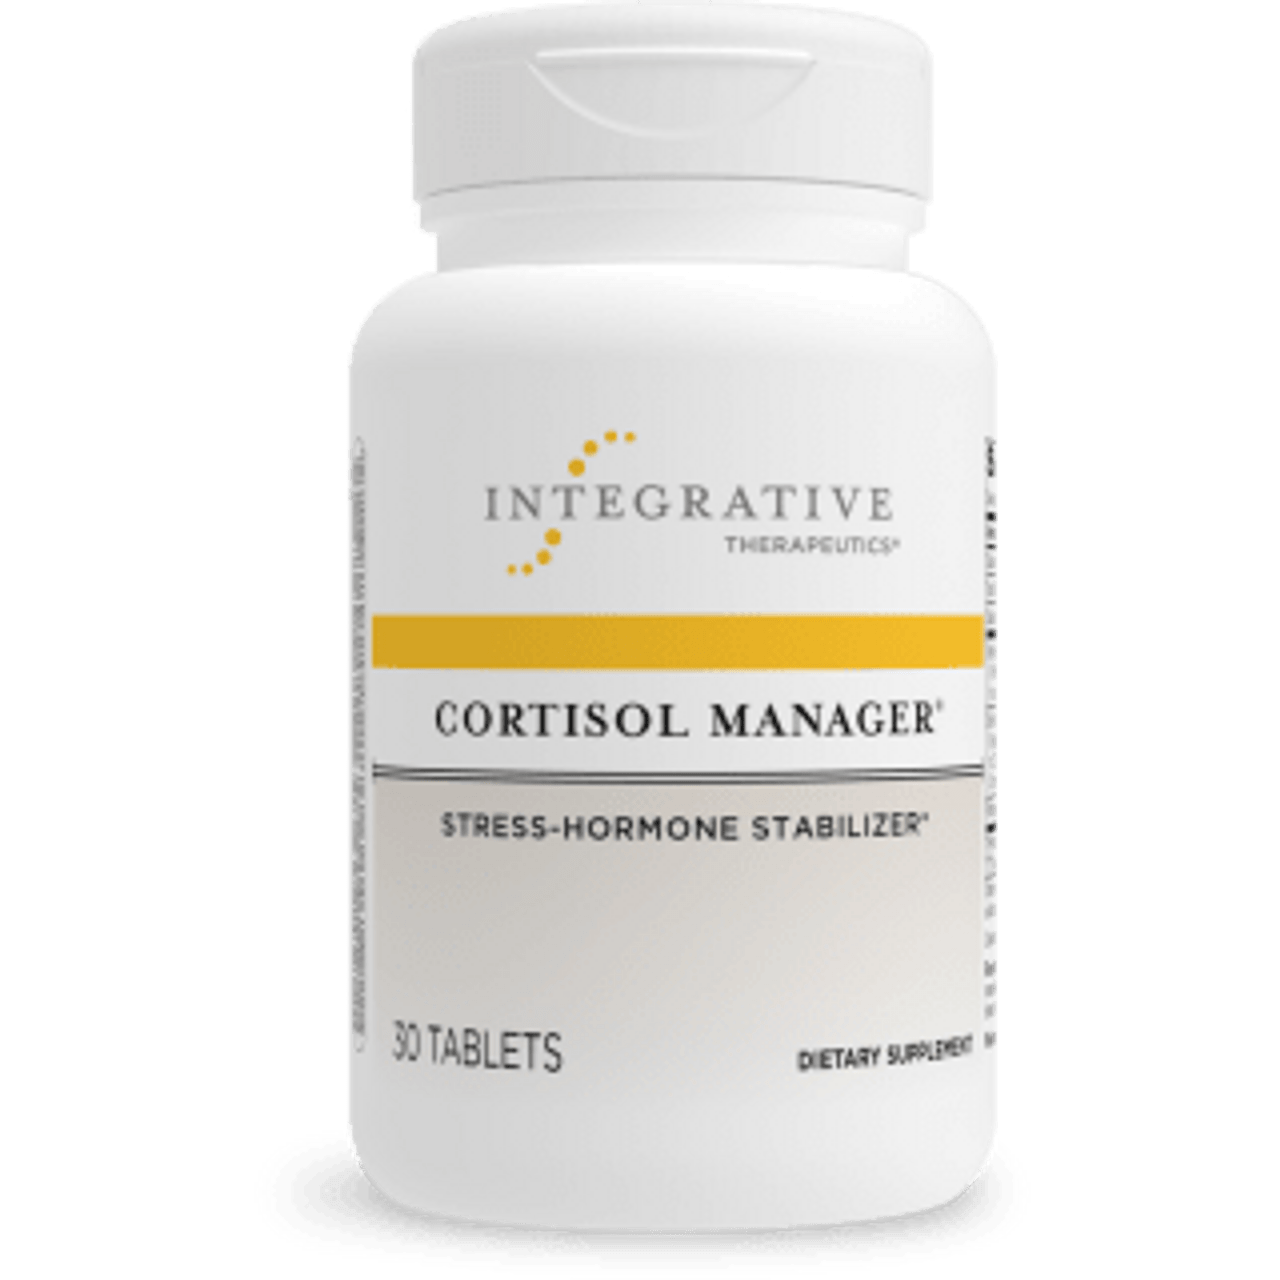 Look for cortisol blocker supplements that have positive user reviews